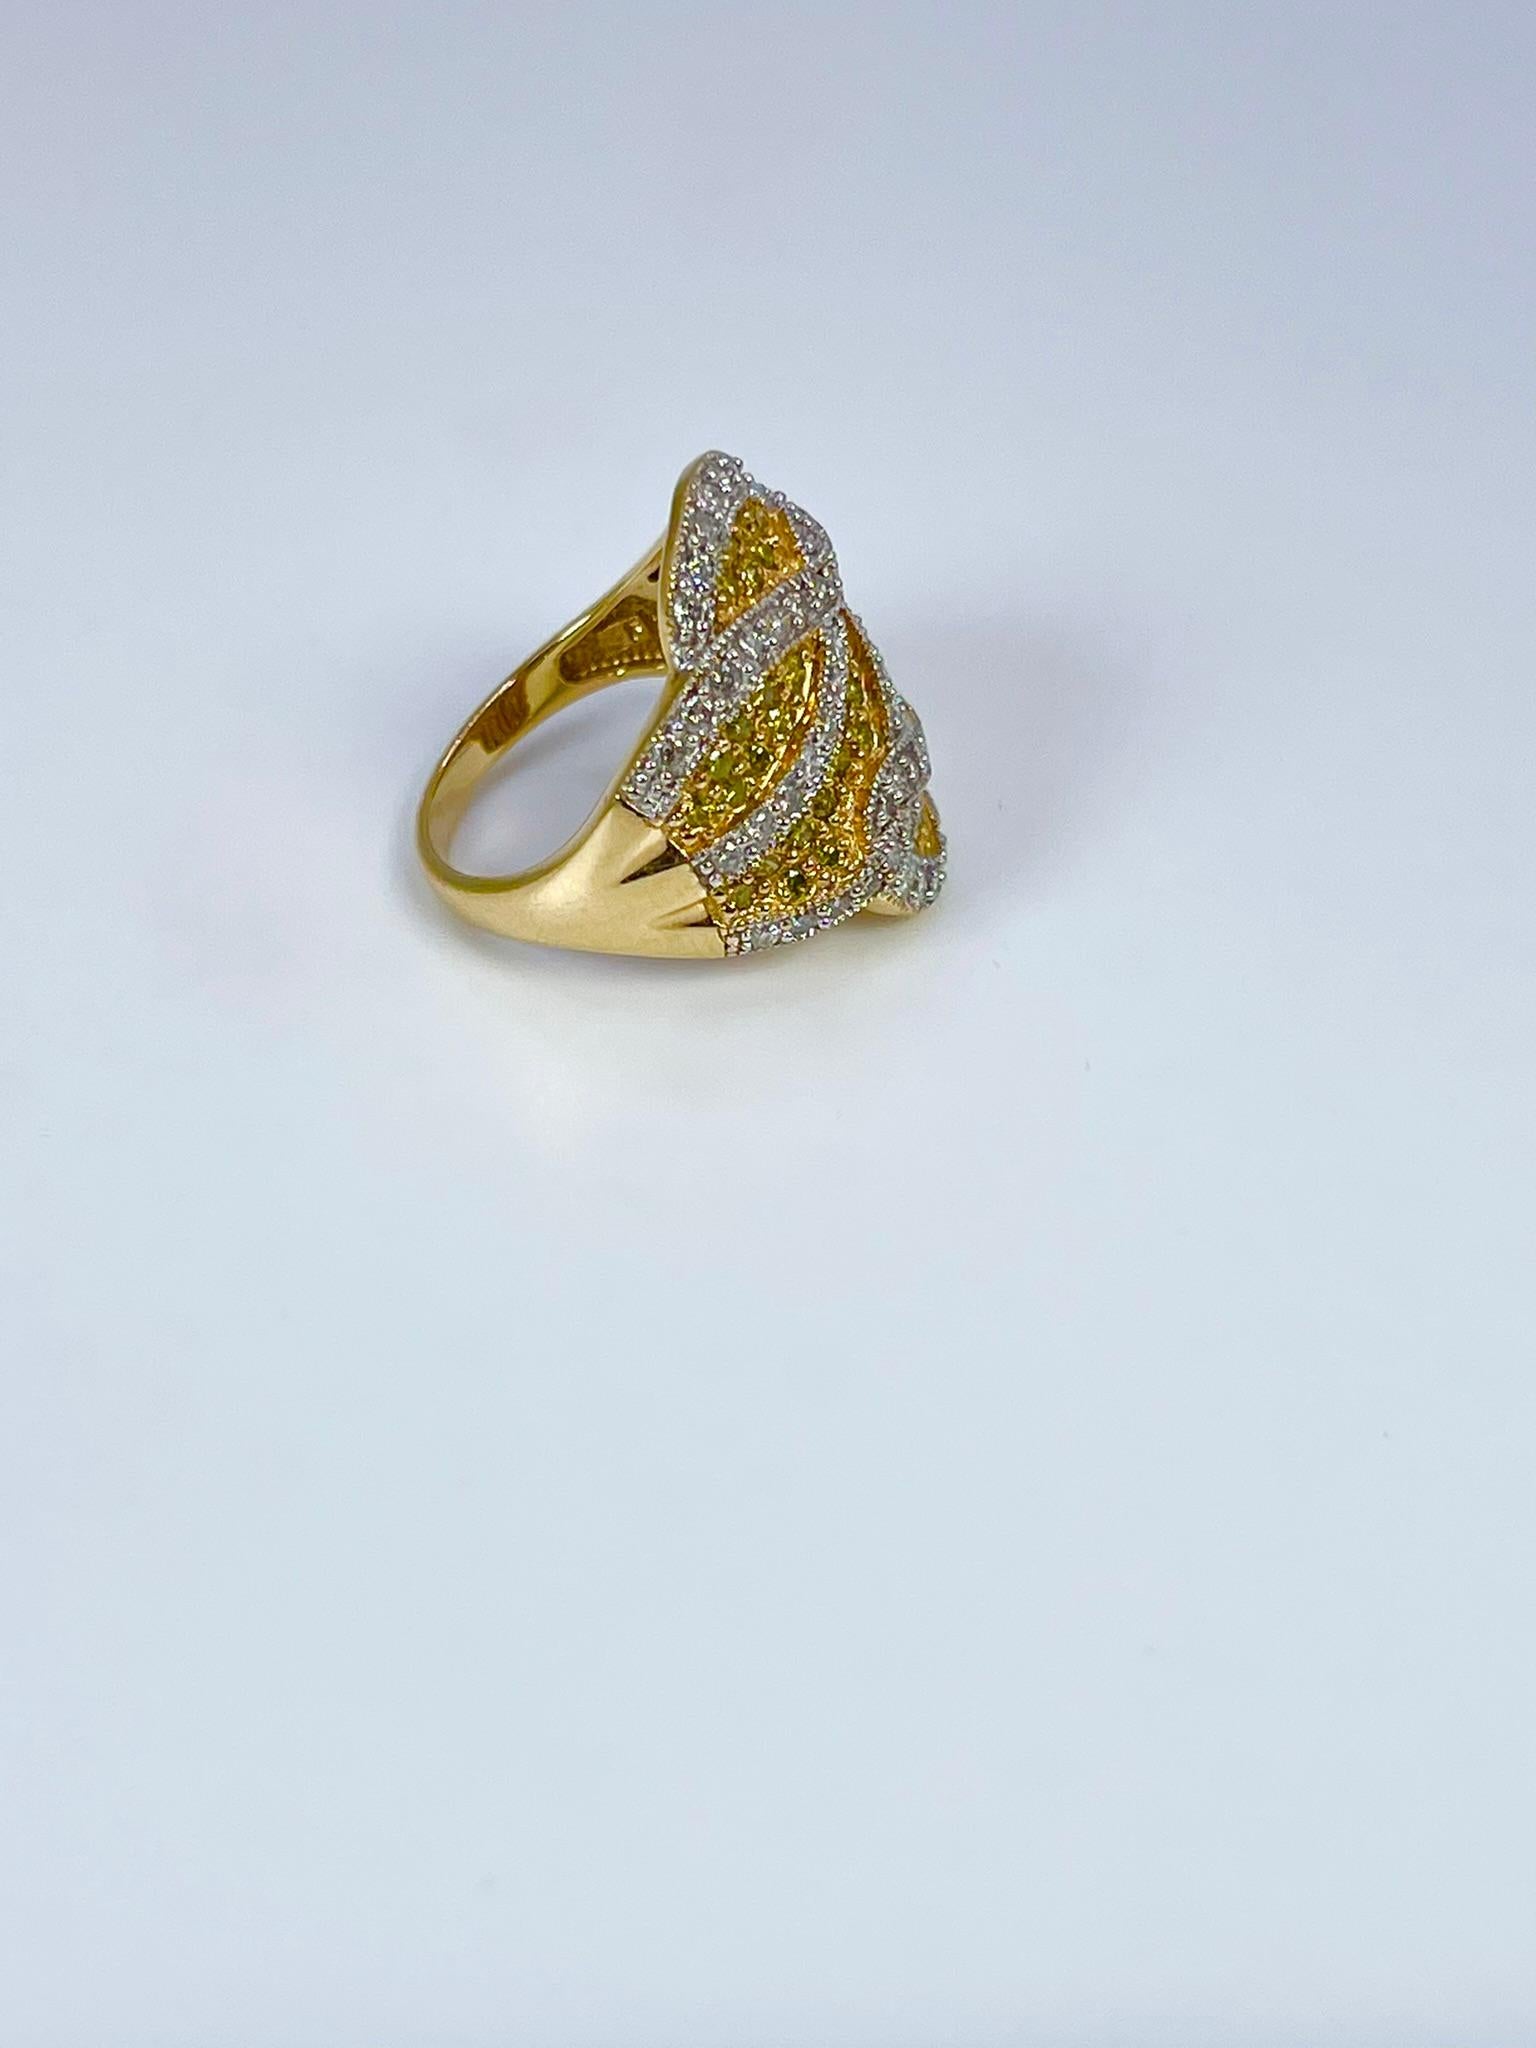 Modern Fancy Yellow Diamond Ring Cocktail Diamond Ring 1.28ct 14kt Gold Wide Dome Ring For Sale